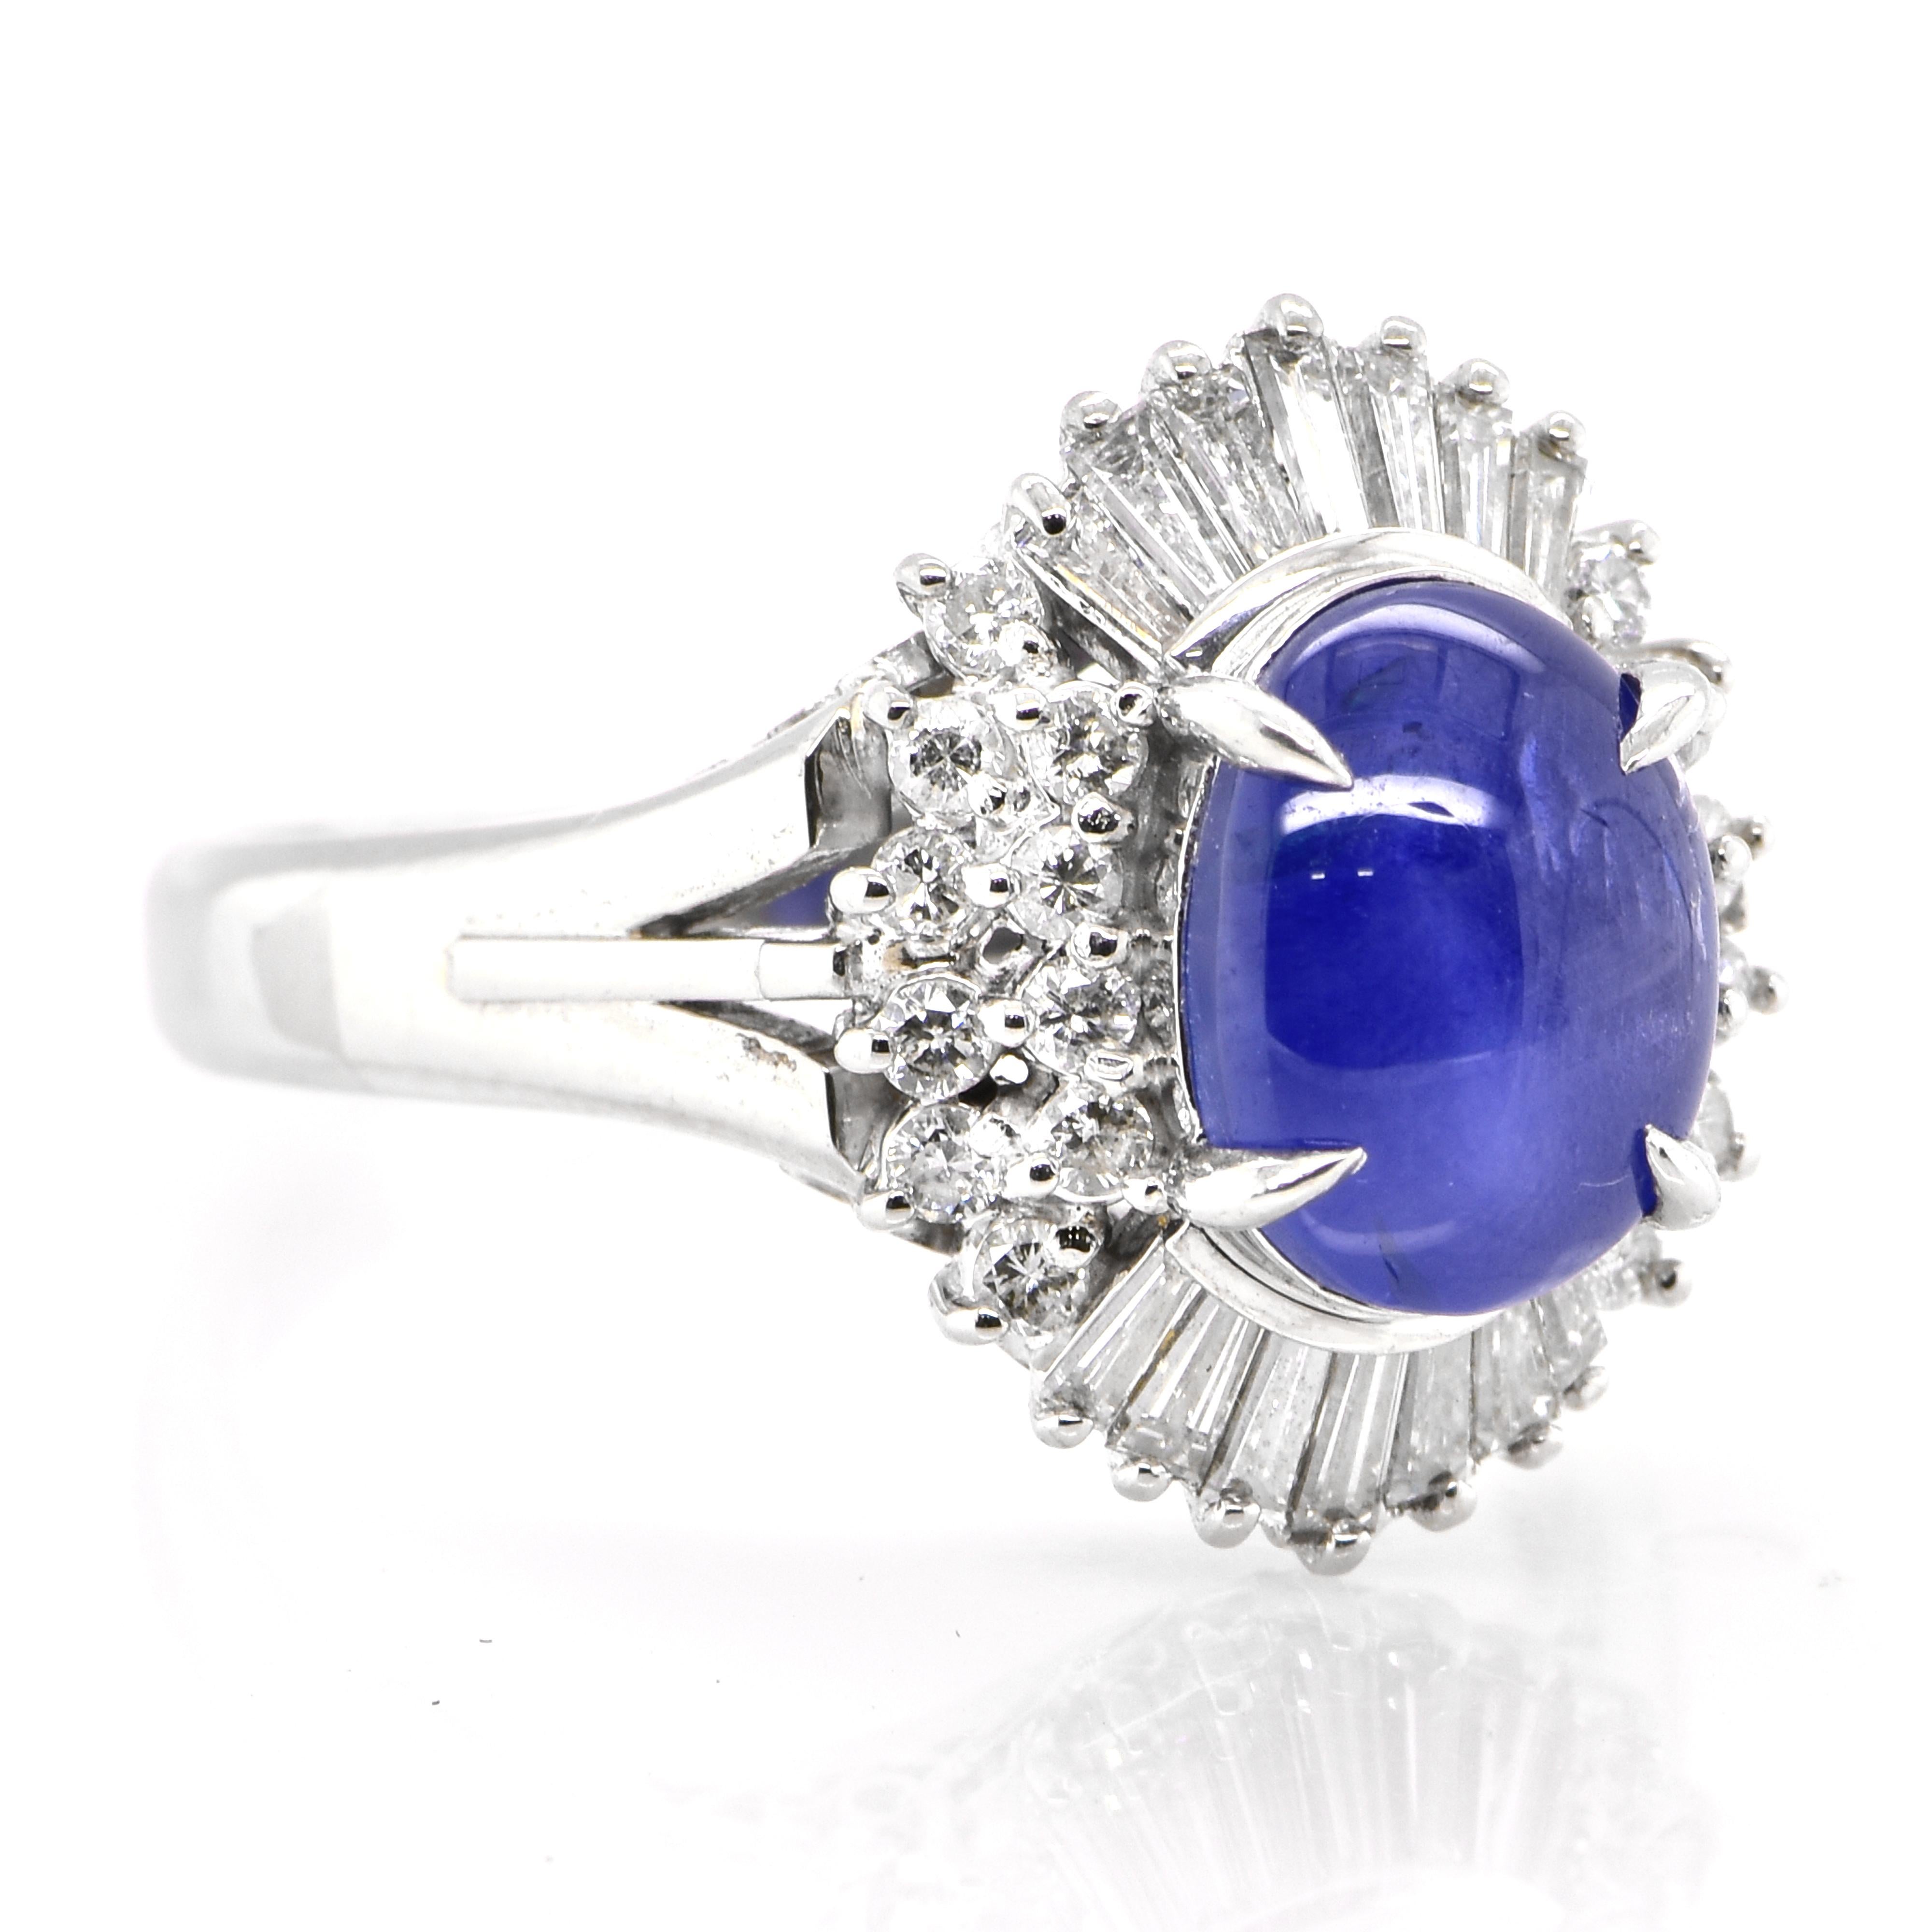 Cabochon 3.30 Carat Natural Star Sapphire and Diamond Ballerina Ring Made in Platinum